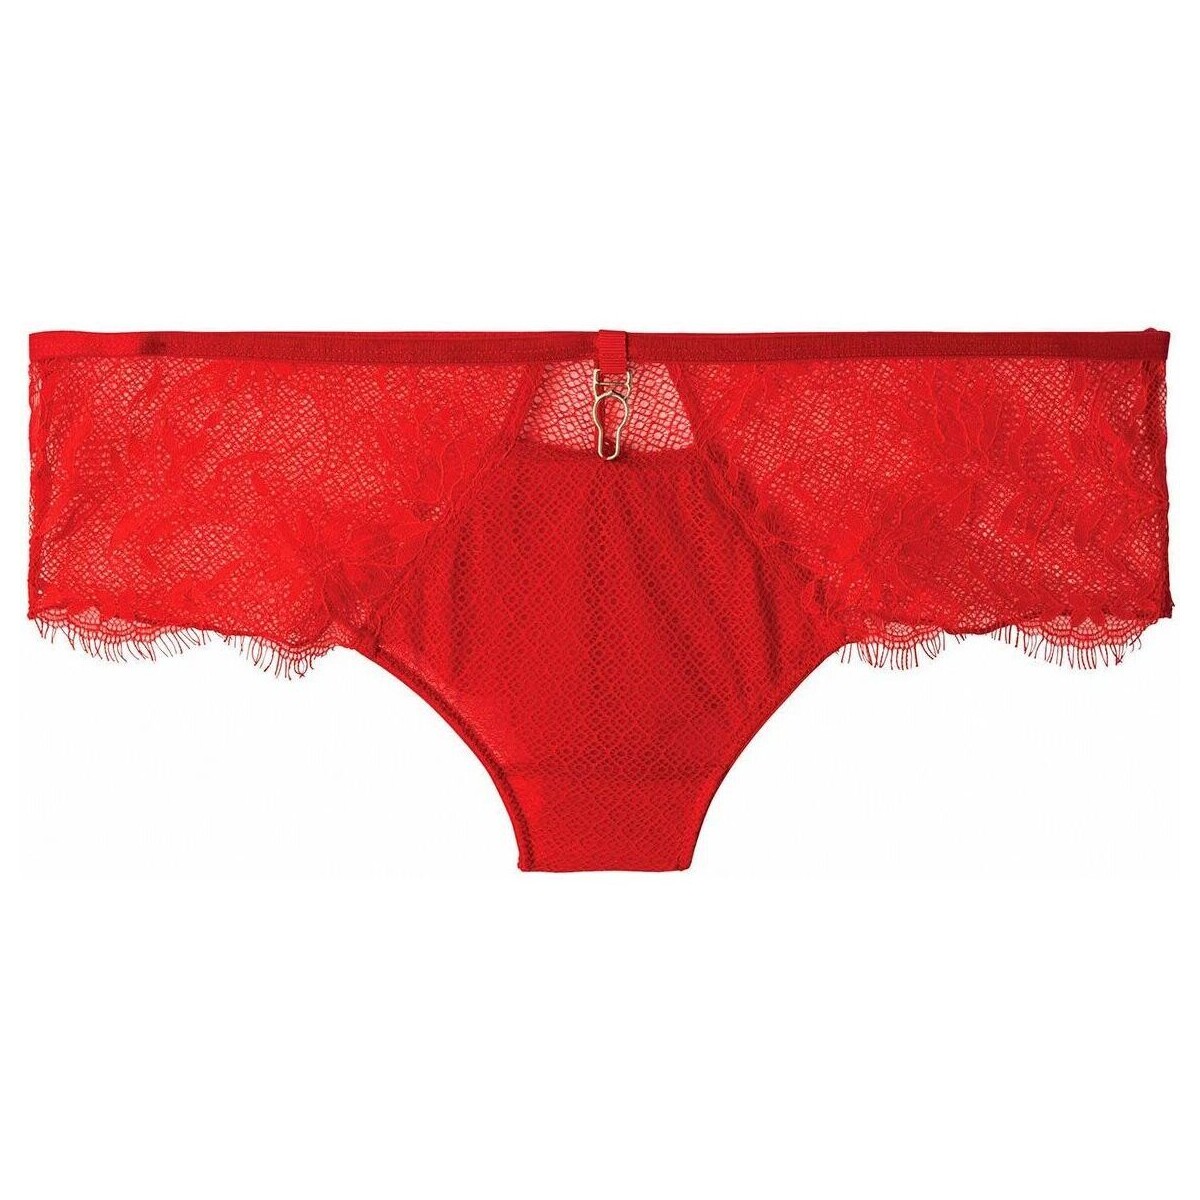 Pomm´poire Rouge Shorty tanga rouge Sangria W6kmR8Nt